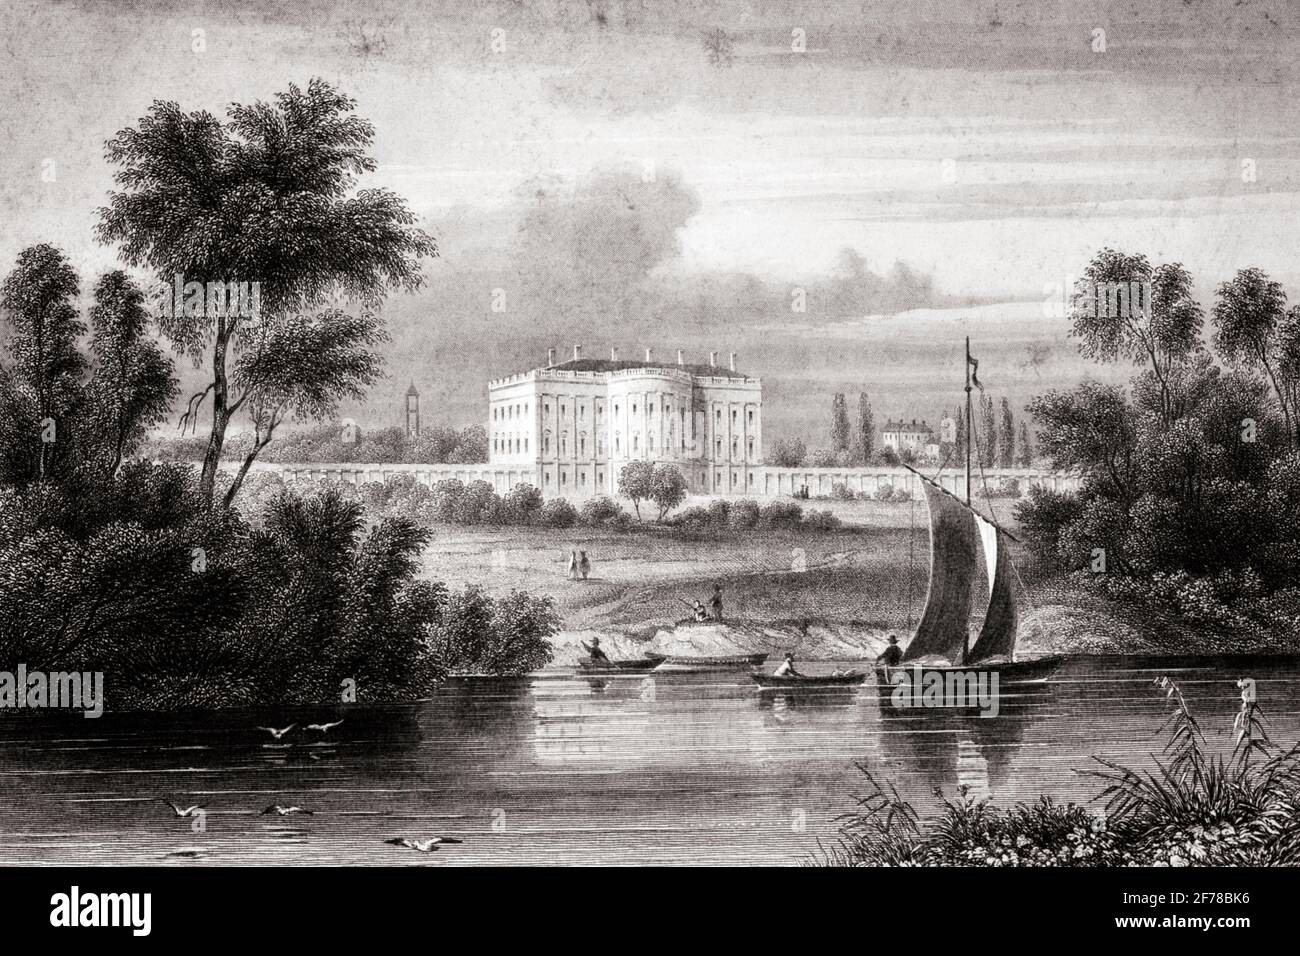 1800s 1810s EARLY VIEW OF THE WHITE HOUSE BOATS IN FOREGROUND DESIGNED BY IRISH-BORN ARCHITECT JAMES HOBAN WASHINGTON DC USA  - q65195 CPC001 HARS EARLY DISTRICT OF COLUMBIA EXTERIOR WORKPLACE PRESIDENTIAL HOMES POLITICS CAPITAL MANSION OFFICIAL RESIDENCE POTOMAC 1810s BLACK AND WHITE DISTRICT FEDERAL FOREGROUND OLD FASHIONED WHITE HOUSE Stock Photo